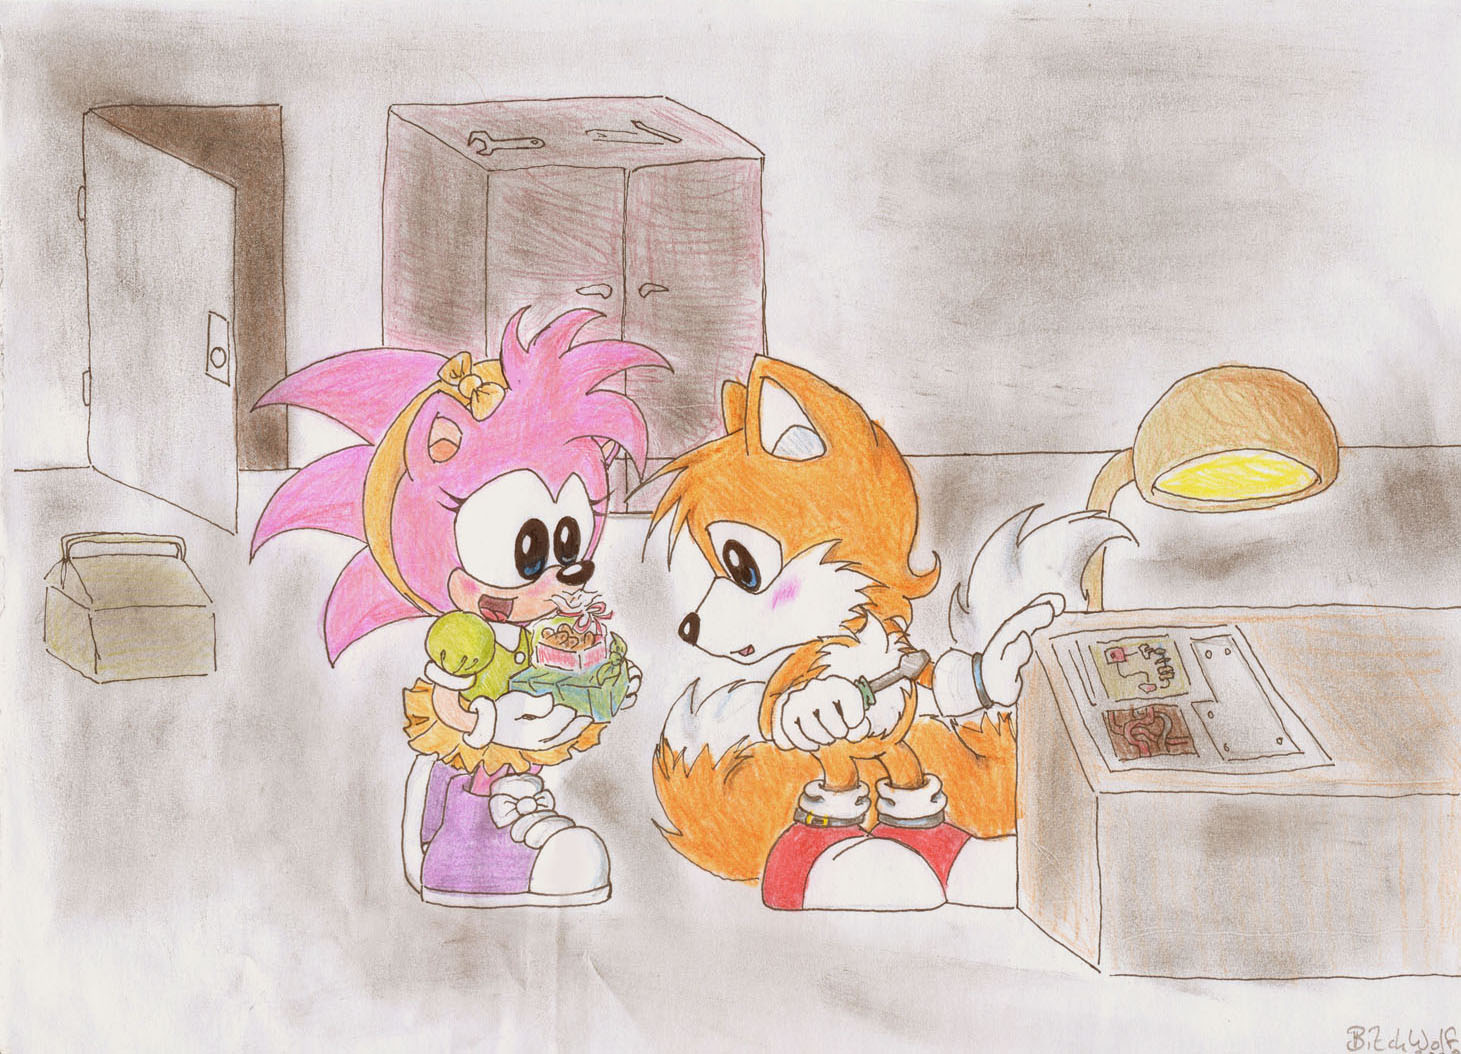 Obento (Tails and Amy) by ScratchTheFox